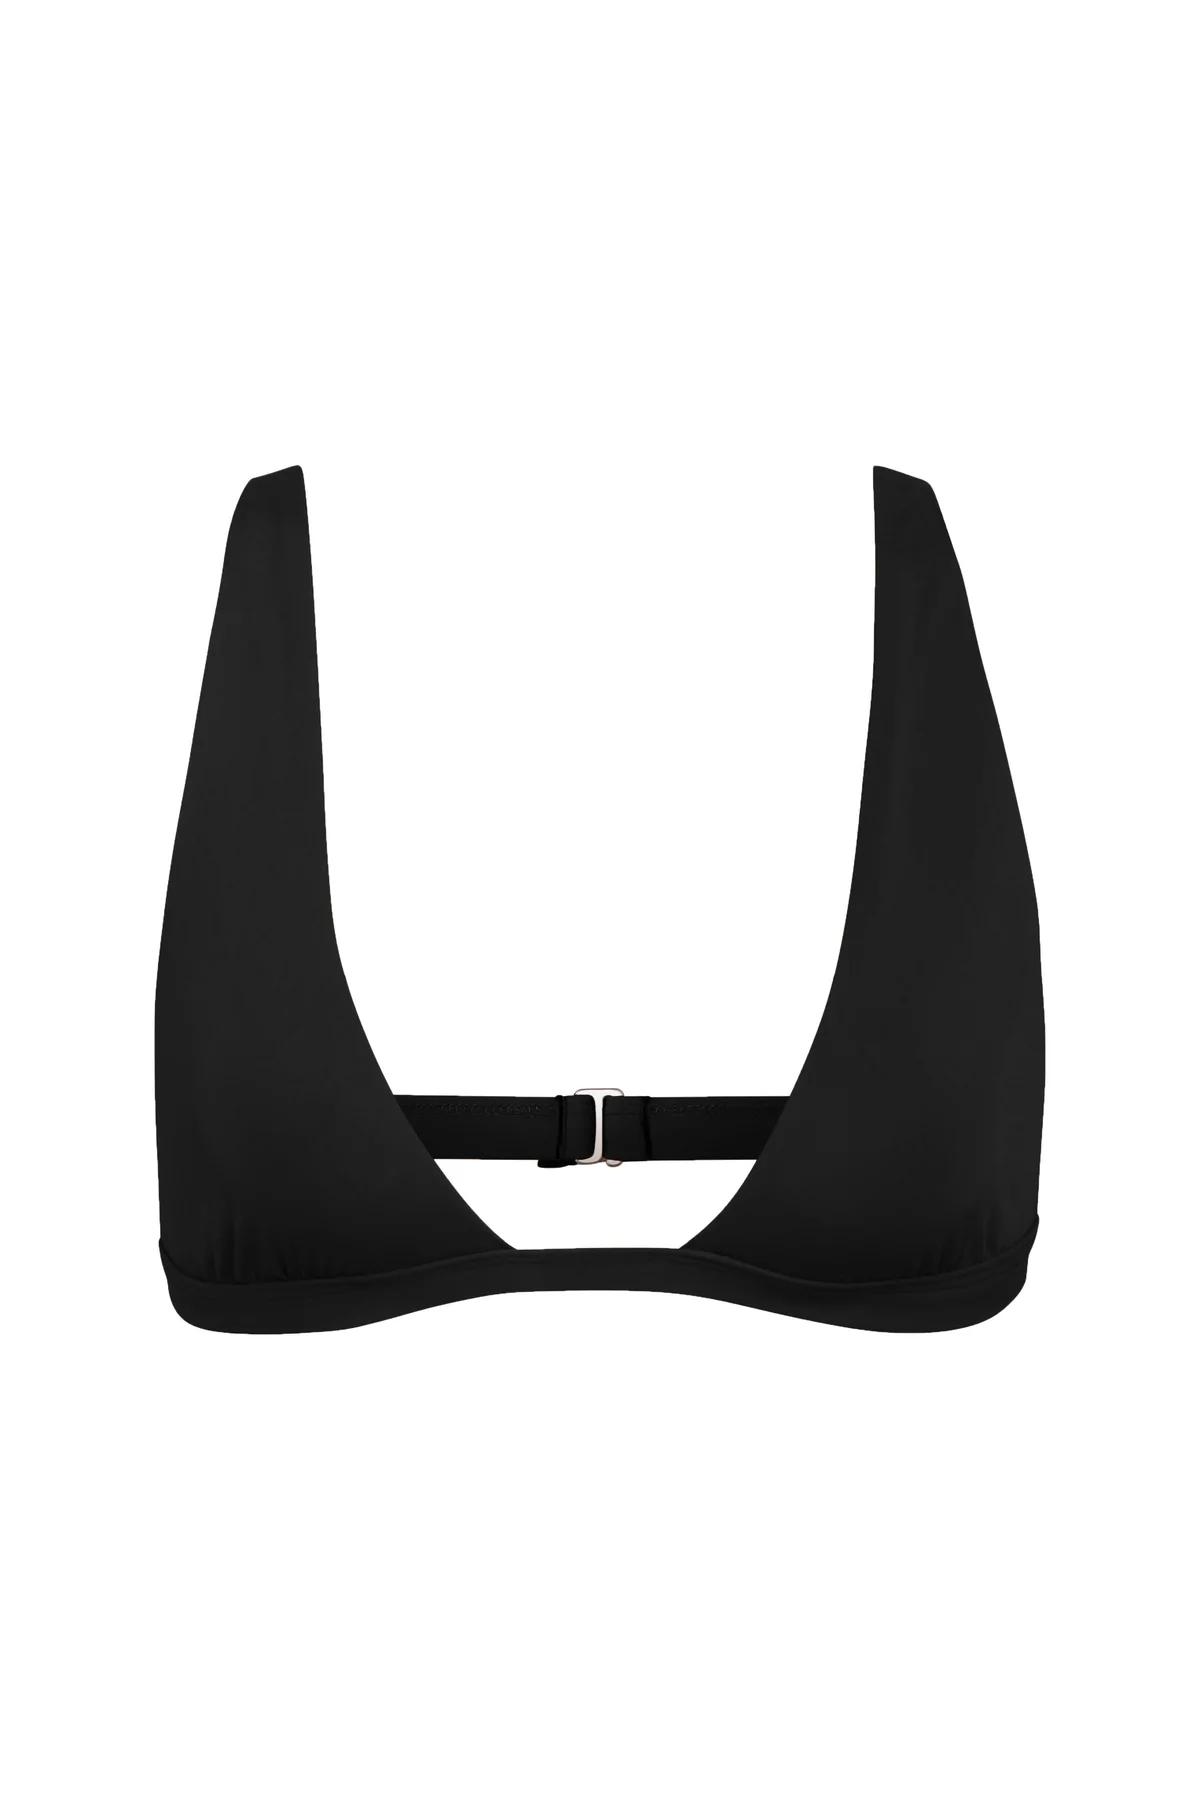 Product Image for The Decollete Triangle Top, Black